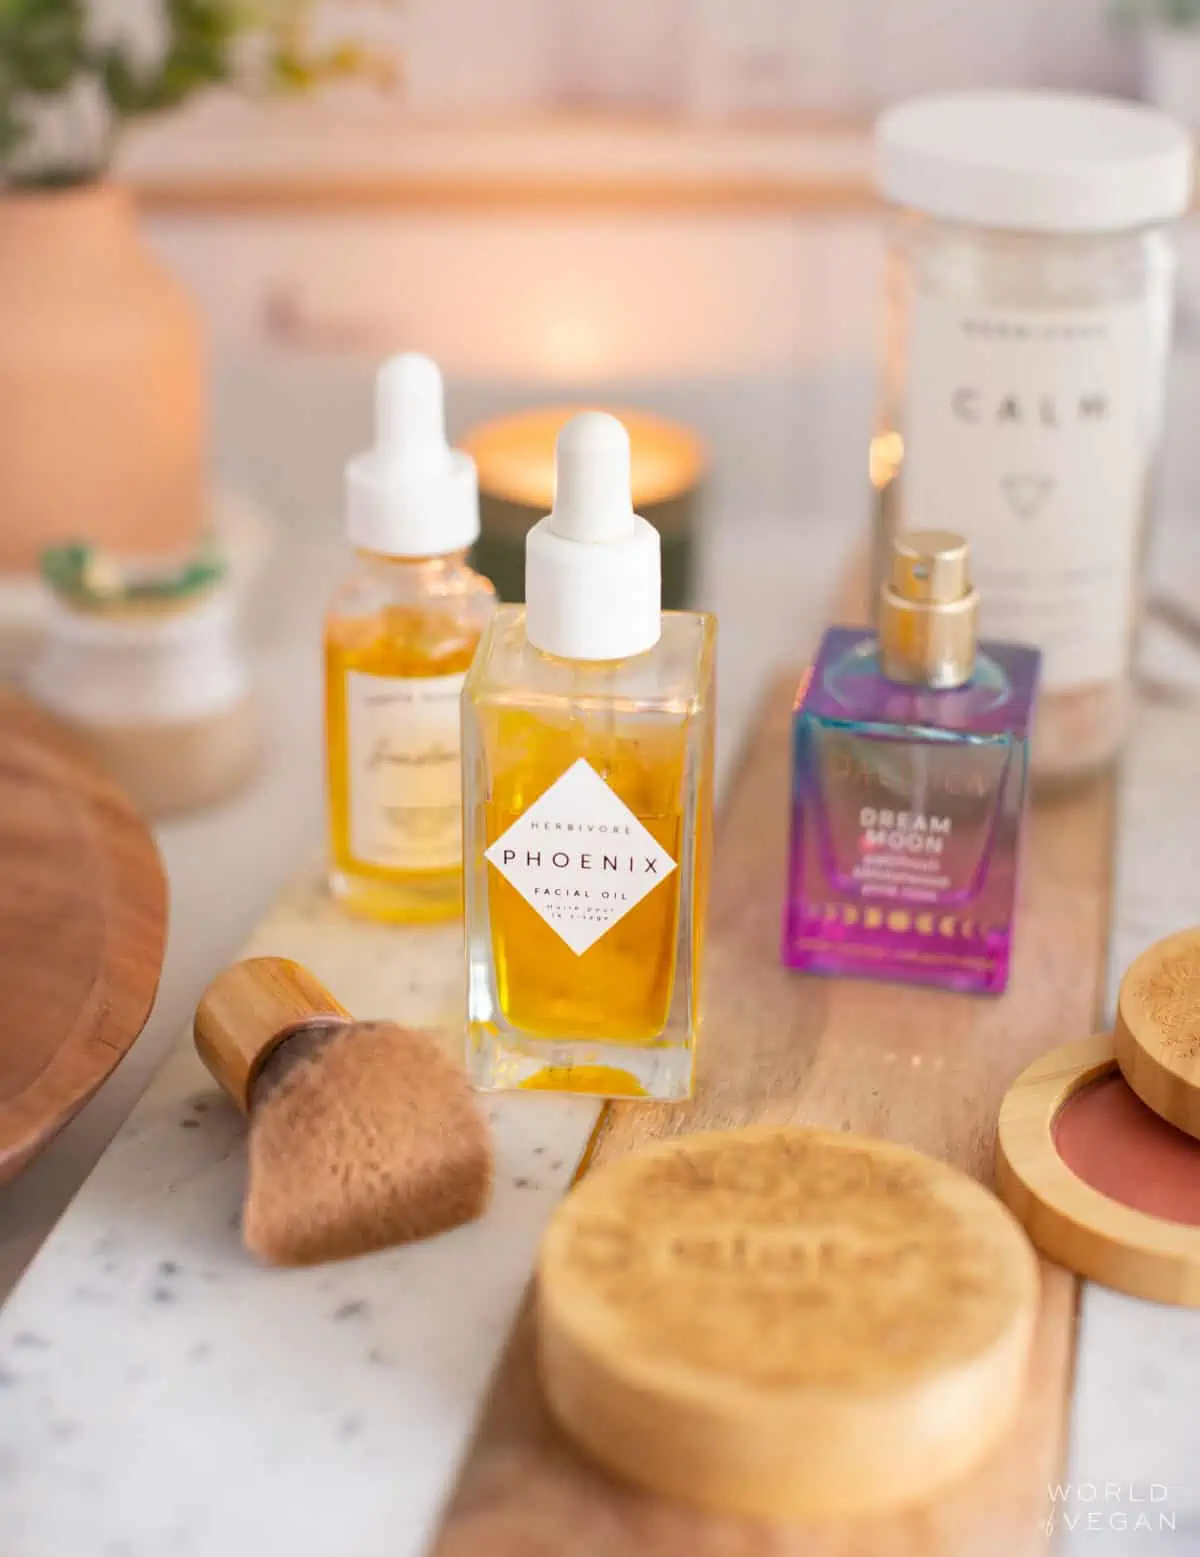 A bottle of Herbivore Botanicals face oil surrounded by other vegan makeup products.